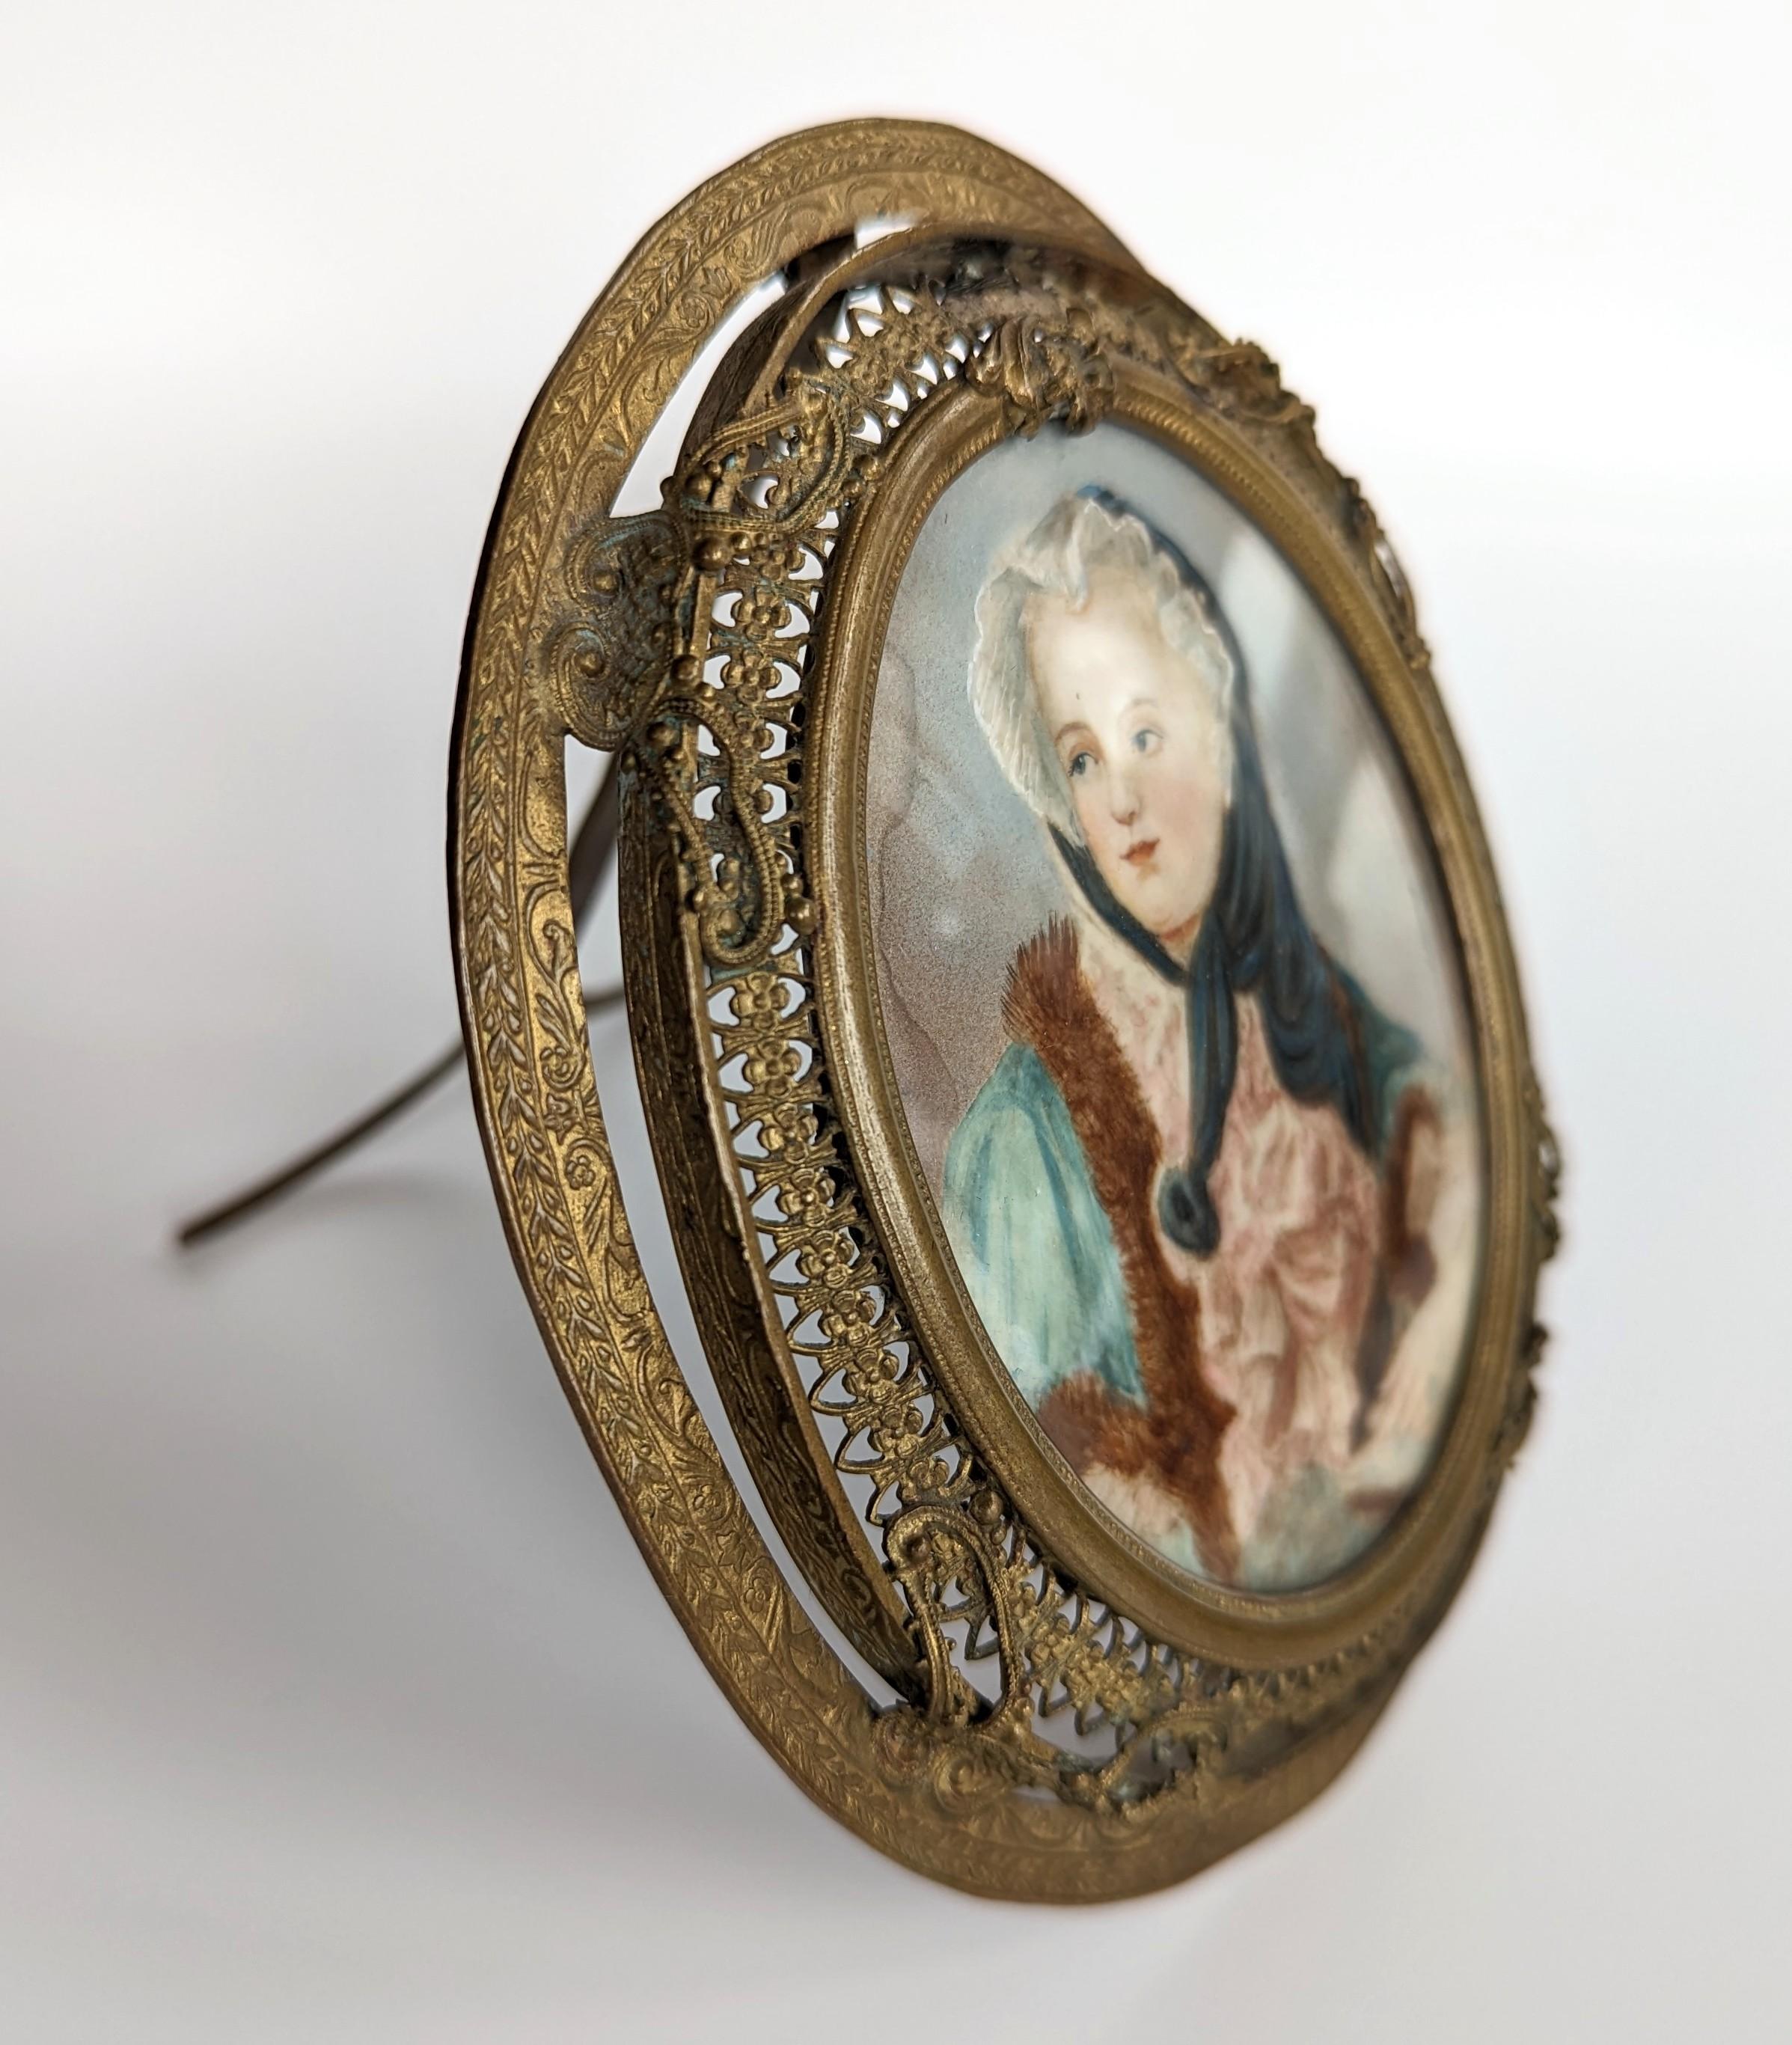 Georgian Antique Hand Painted Miniature Portrait Filigree Brass Easel Frame Art Painting For Sale